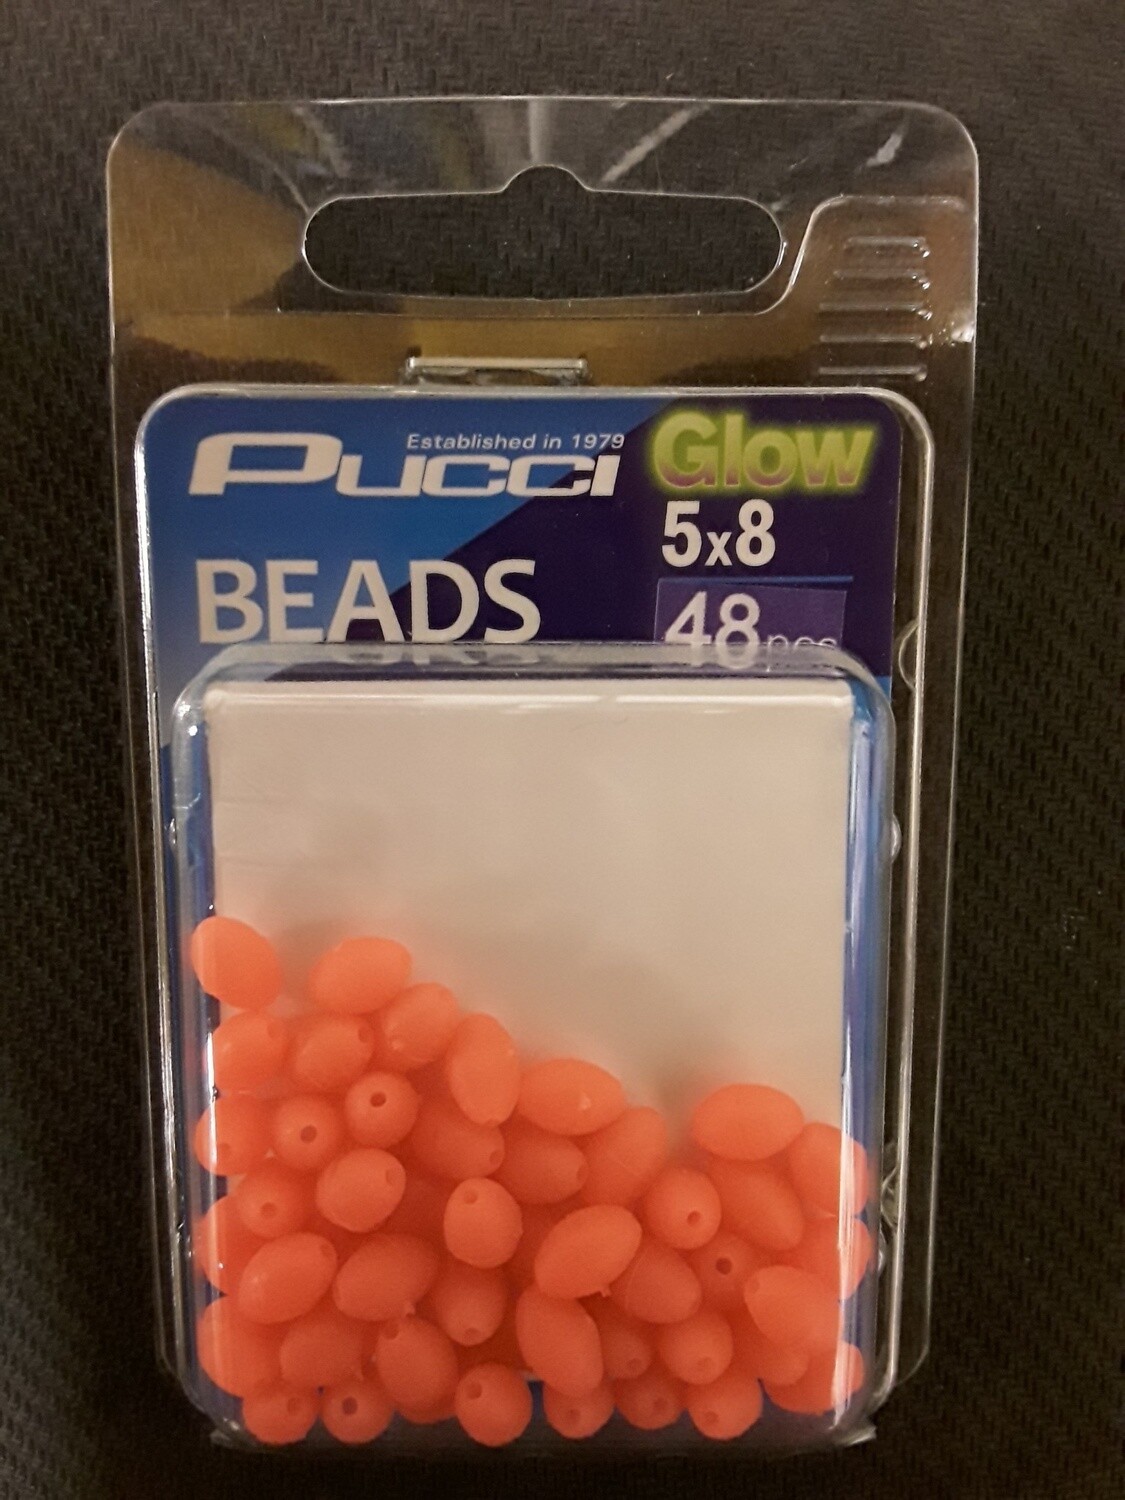 PUCCI BEADS EGG 5X8 SOFT RED GLOW 60 PK